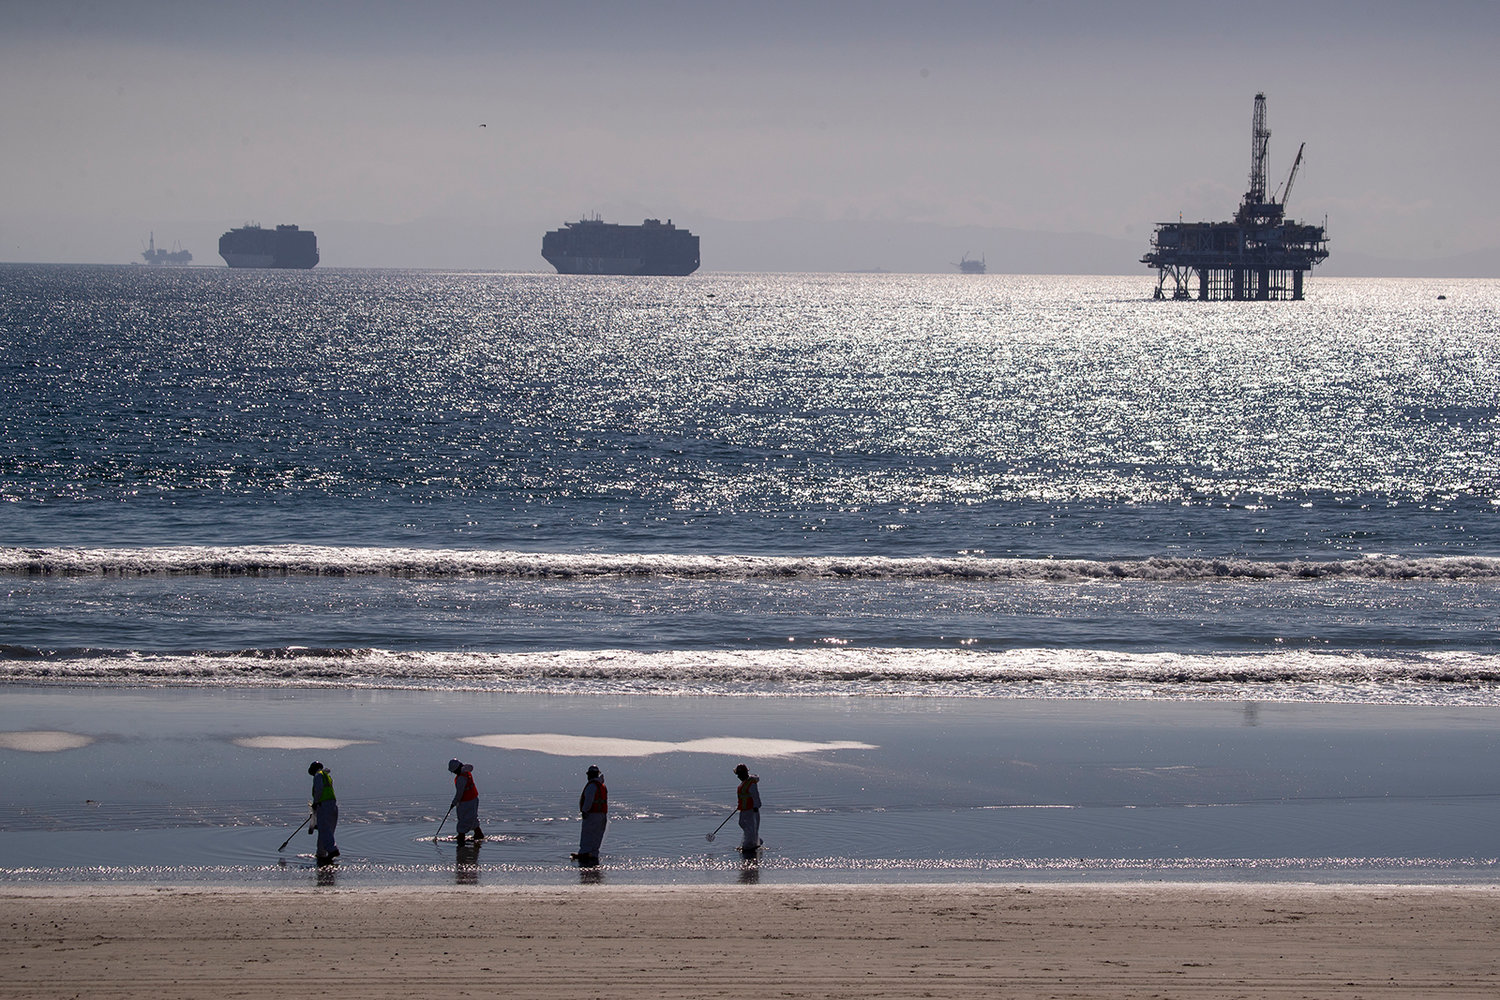 Container ships and an oil derrick line the horizon as environmental oil spill cleanup crews search the beach, cleaning up oil chucks from a major oil spill in Huntington Beach Tuesday, Oct. 5, 2021. (Allen J. Schaben/Los Angeles Times/TNS)